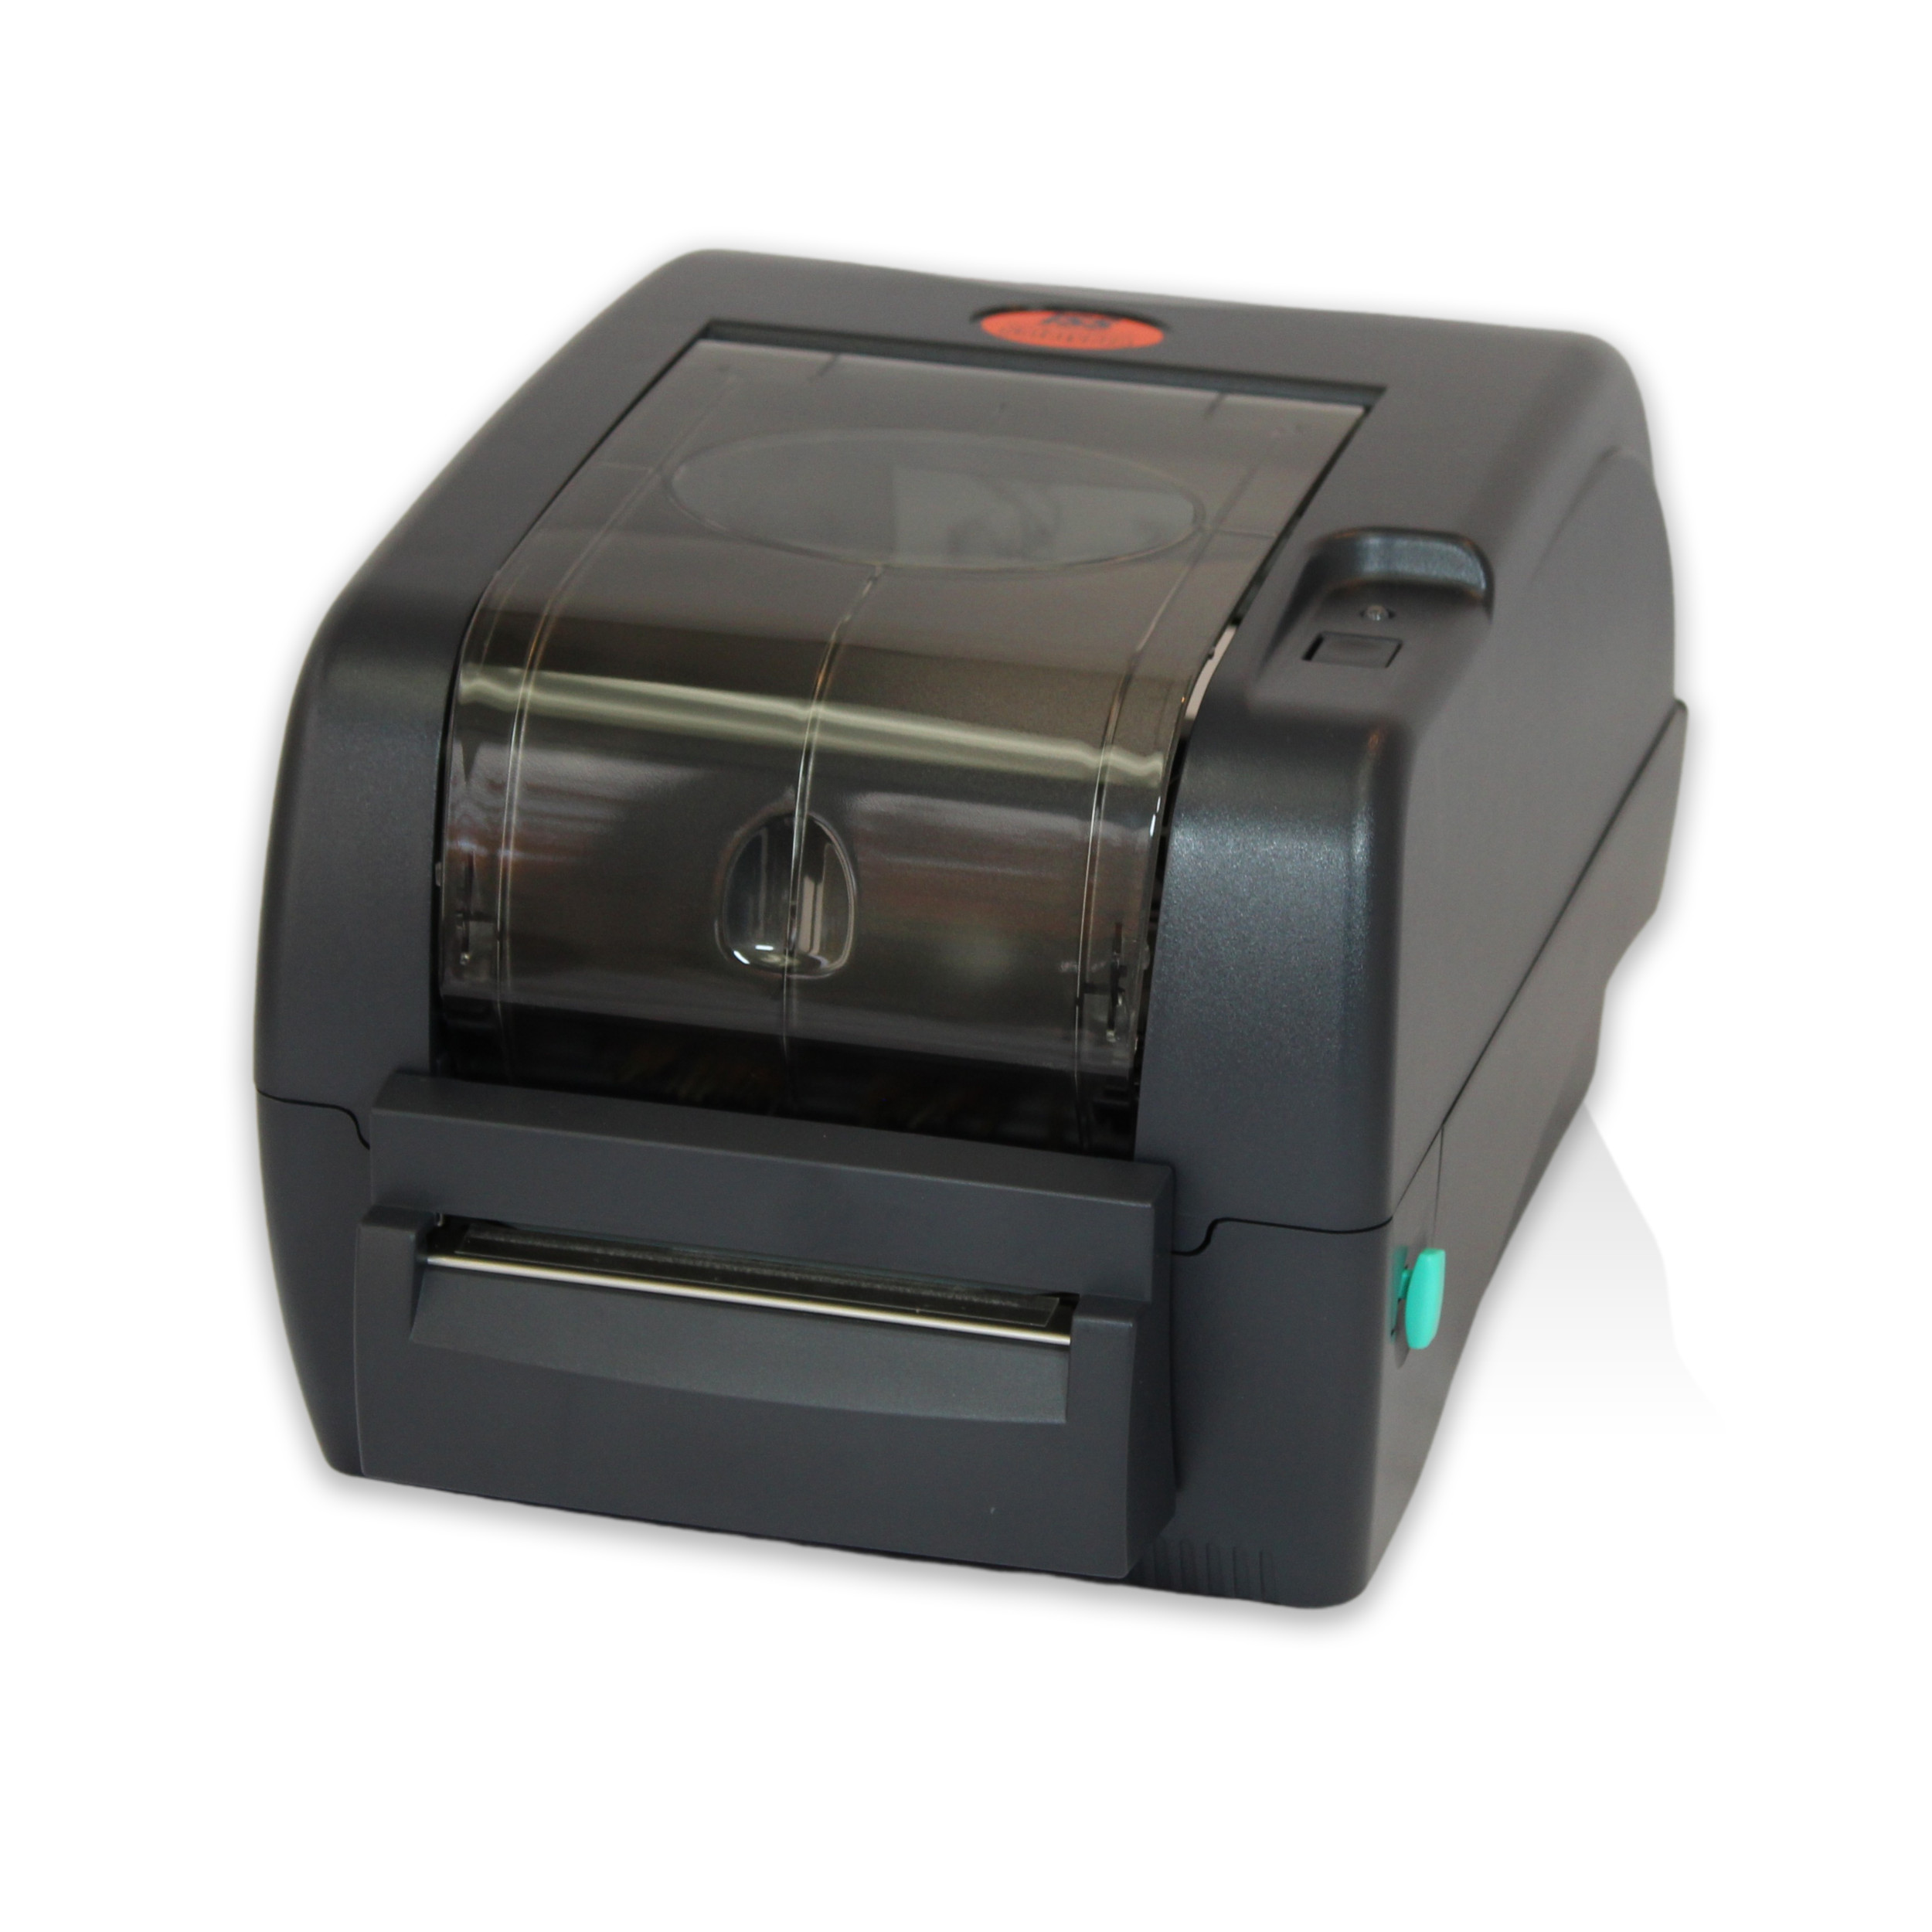 Detail view for SafetyPro 200 Industrial Label Printer